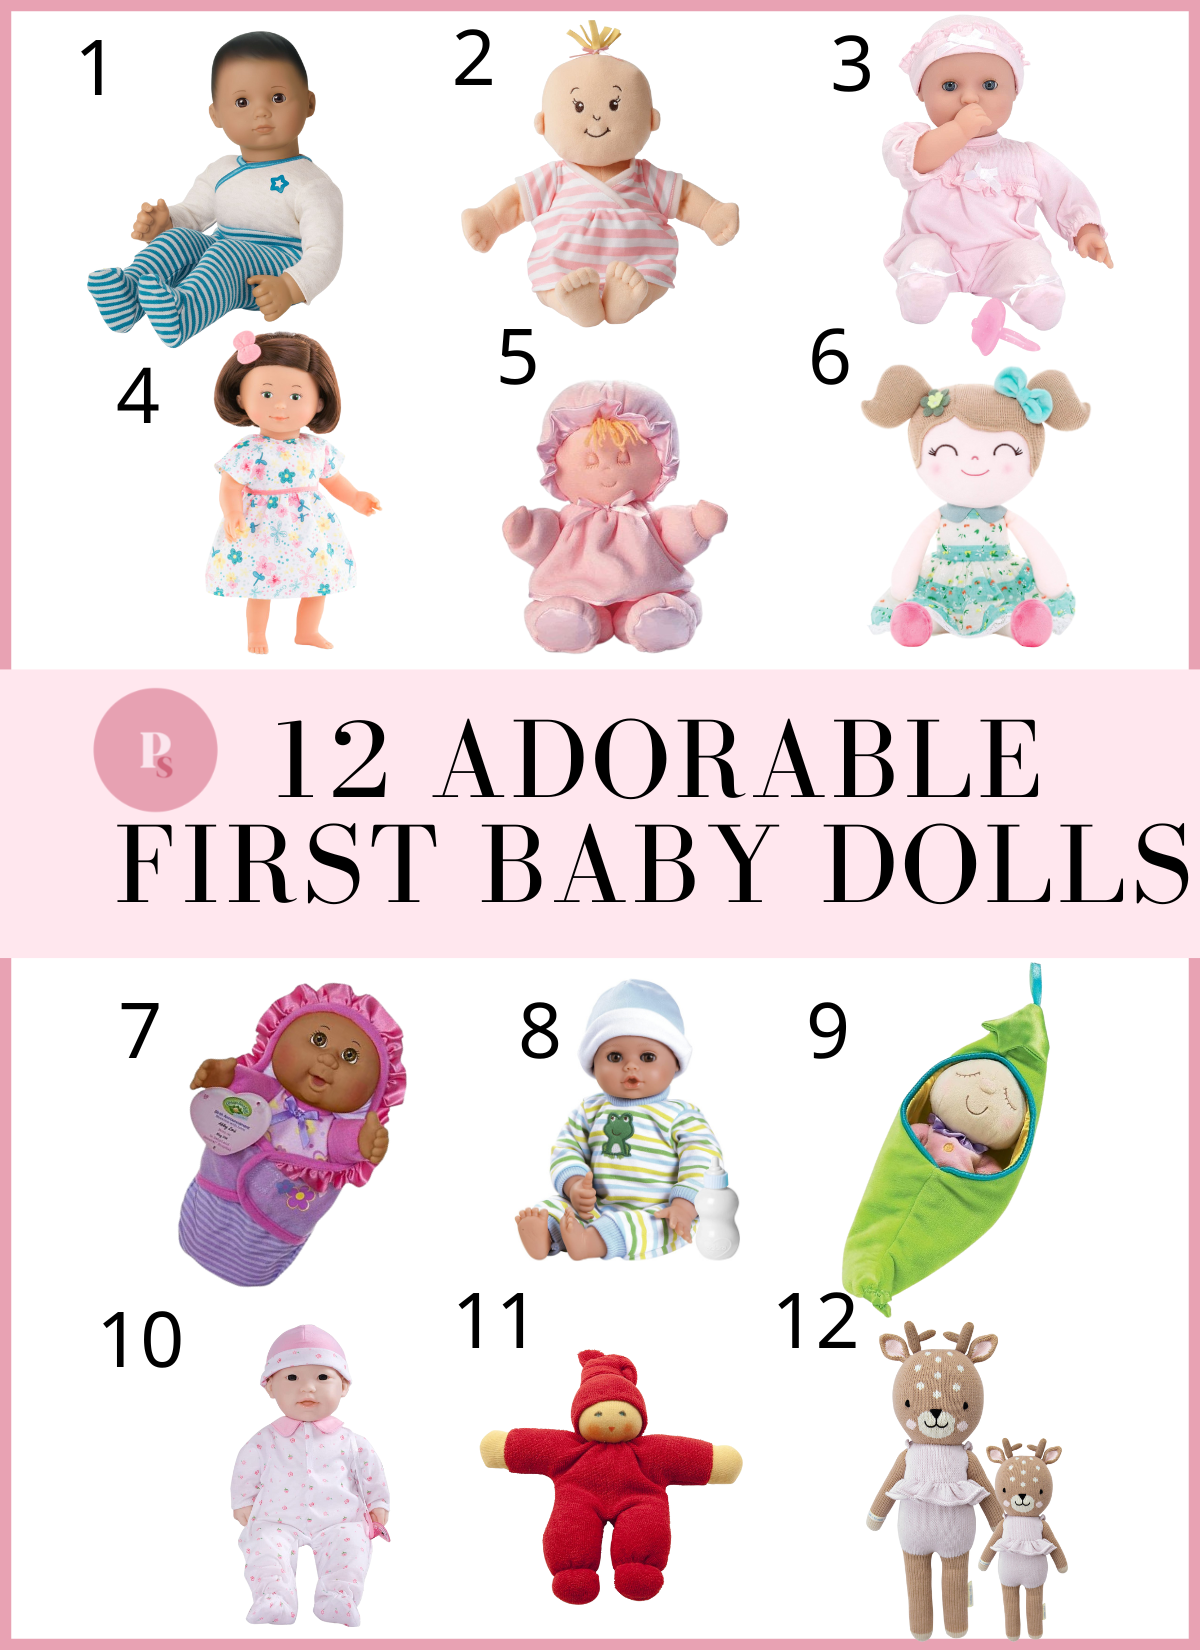 Best Baby Dolls for Your One-Year-Old